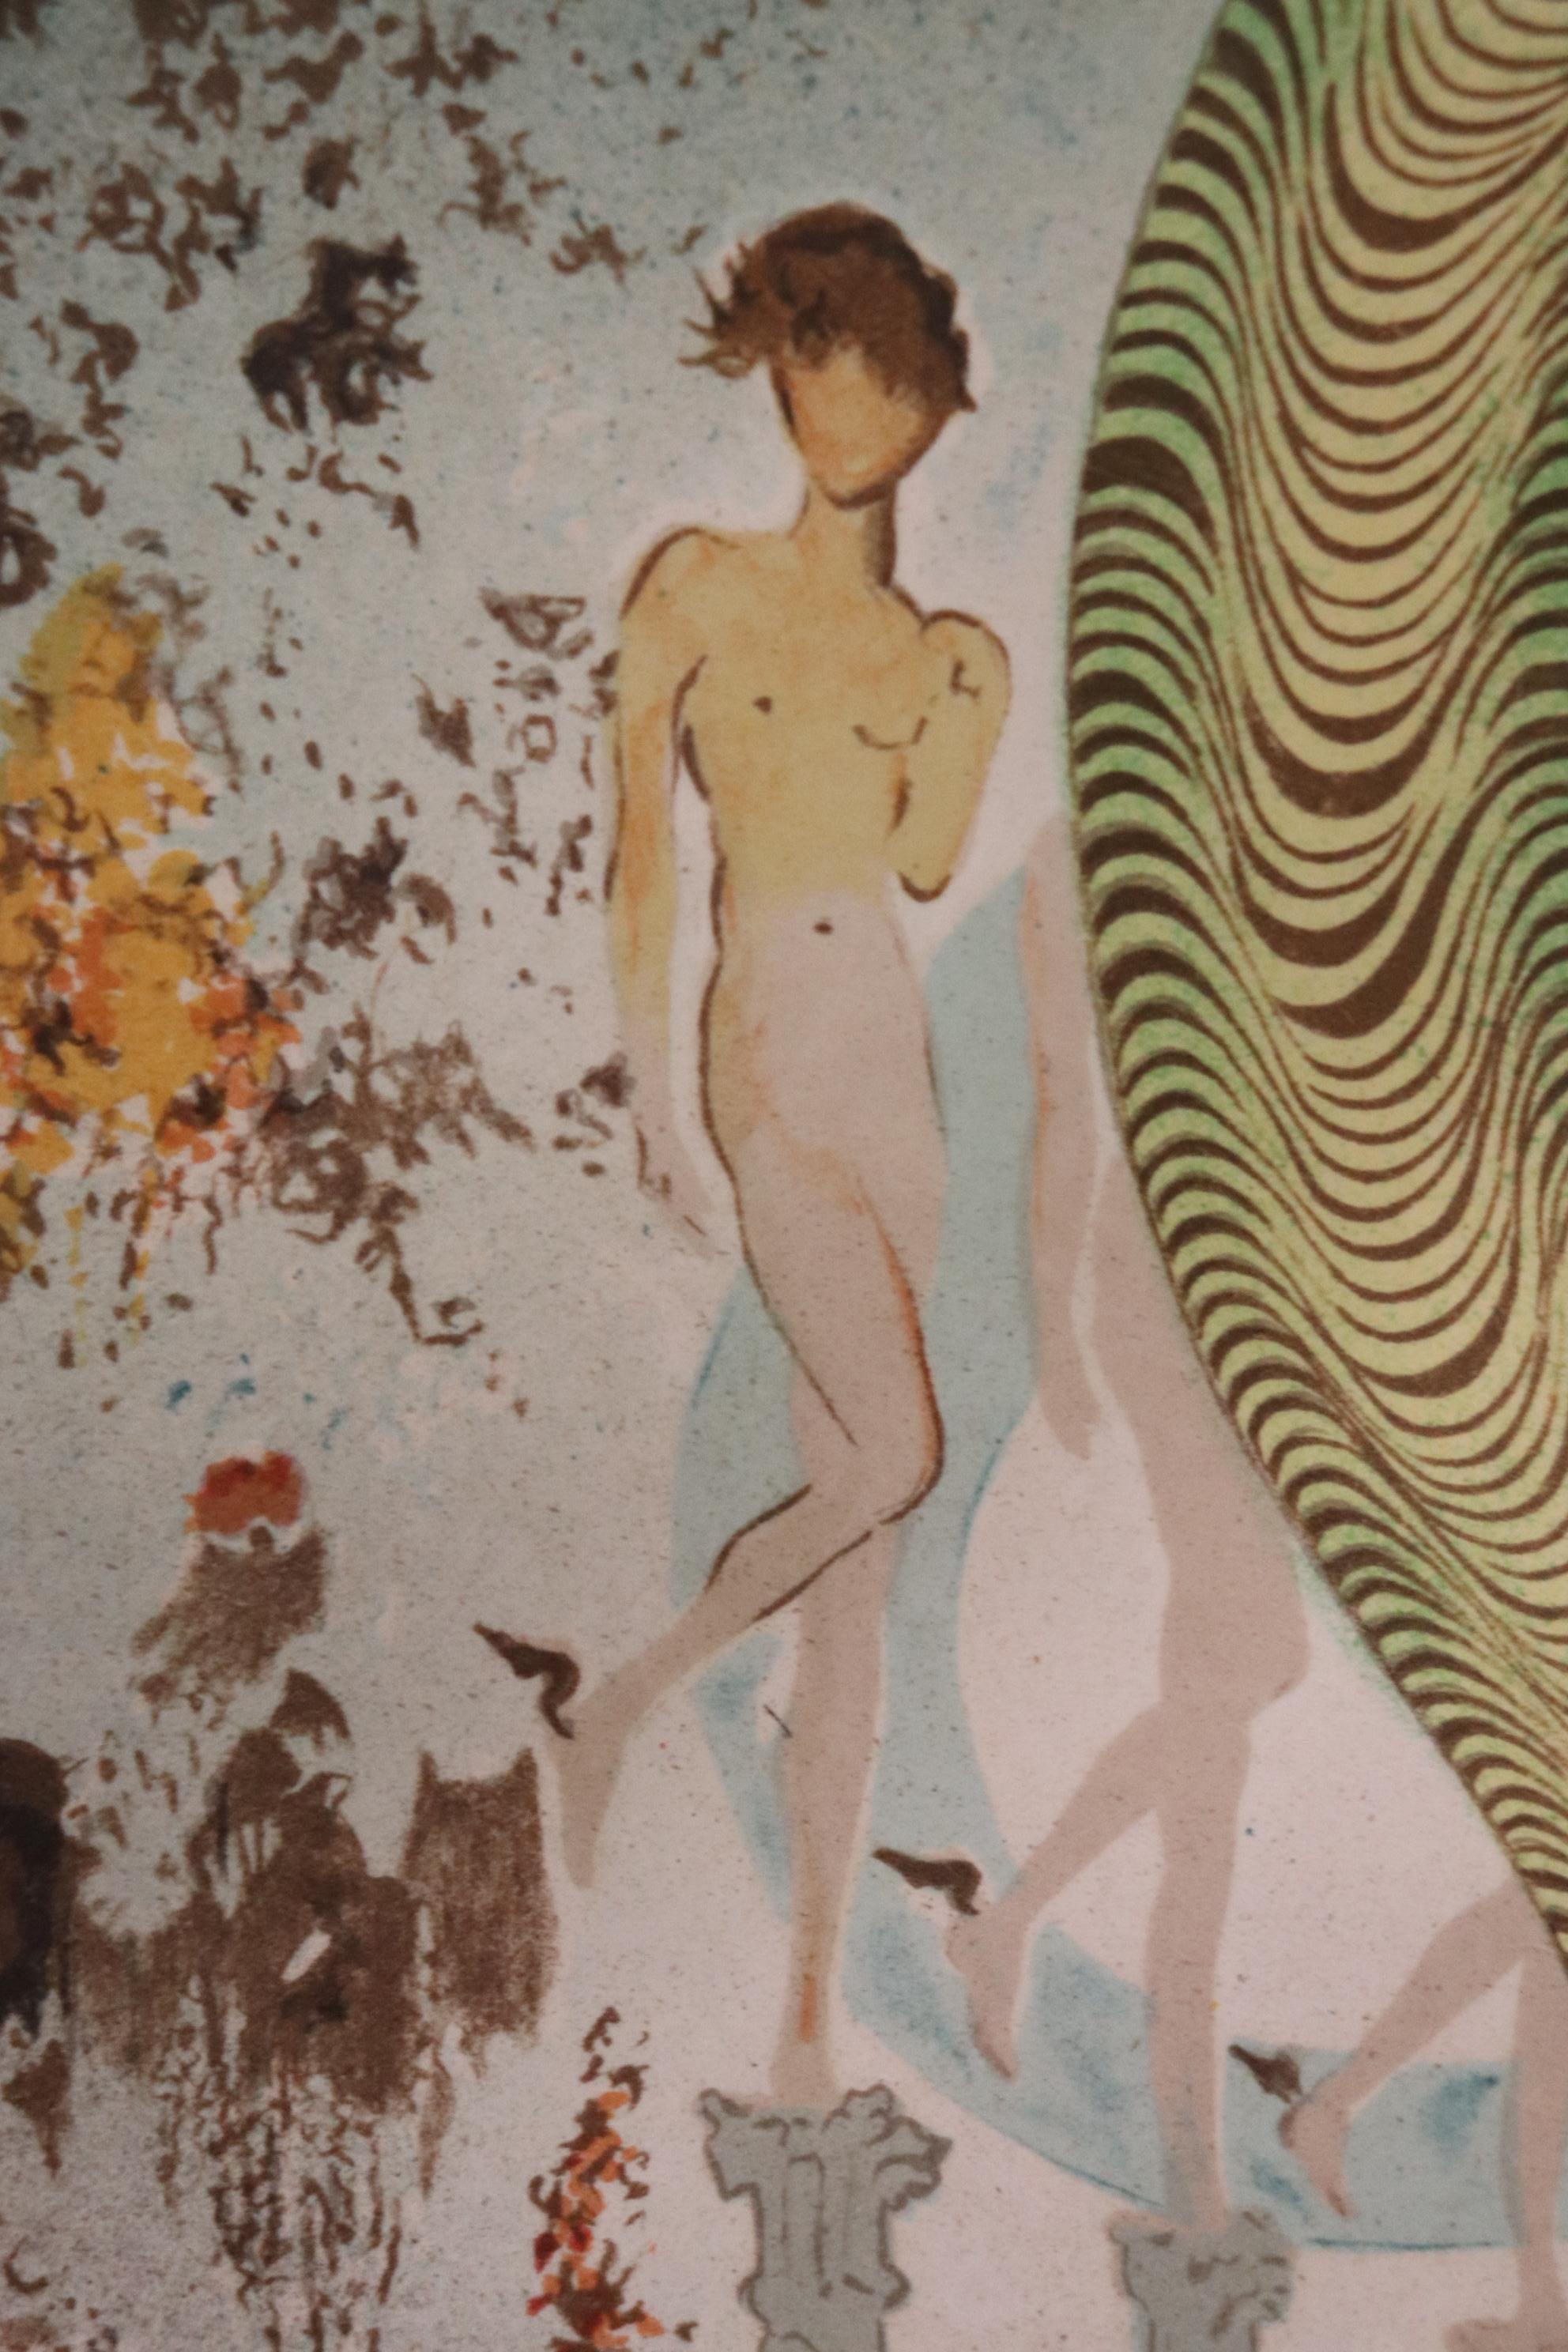 Surreal Figural Signed Print with Nudes 1